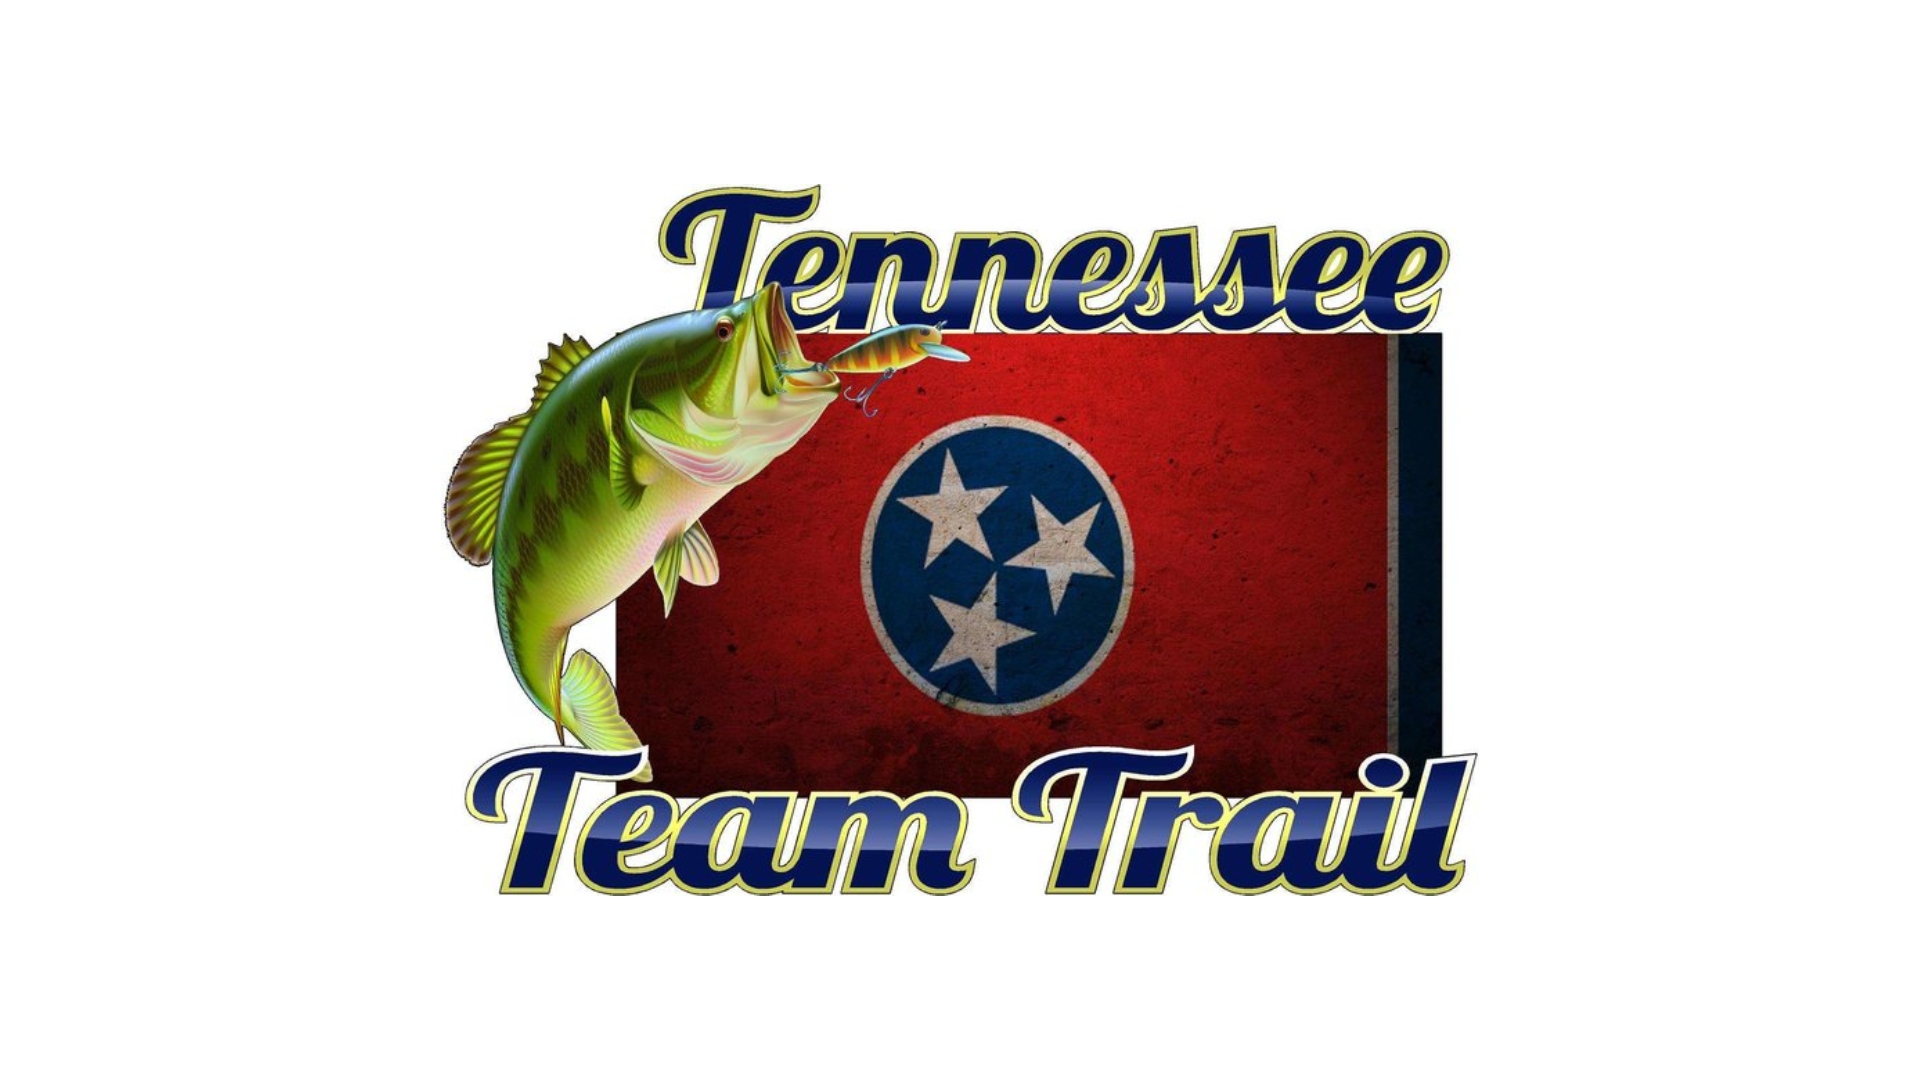 Tennessee Team Trail event logo